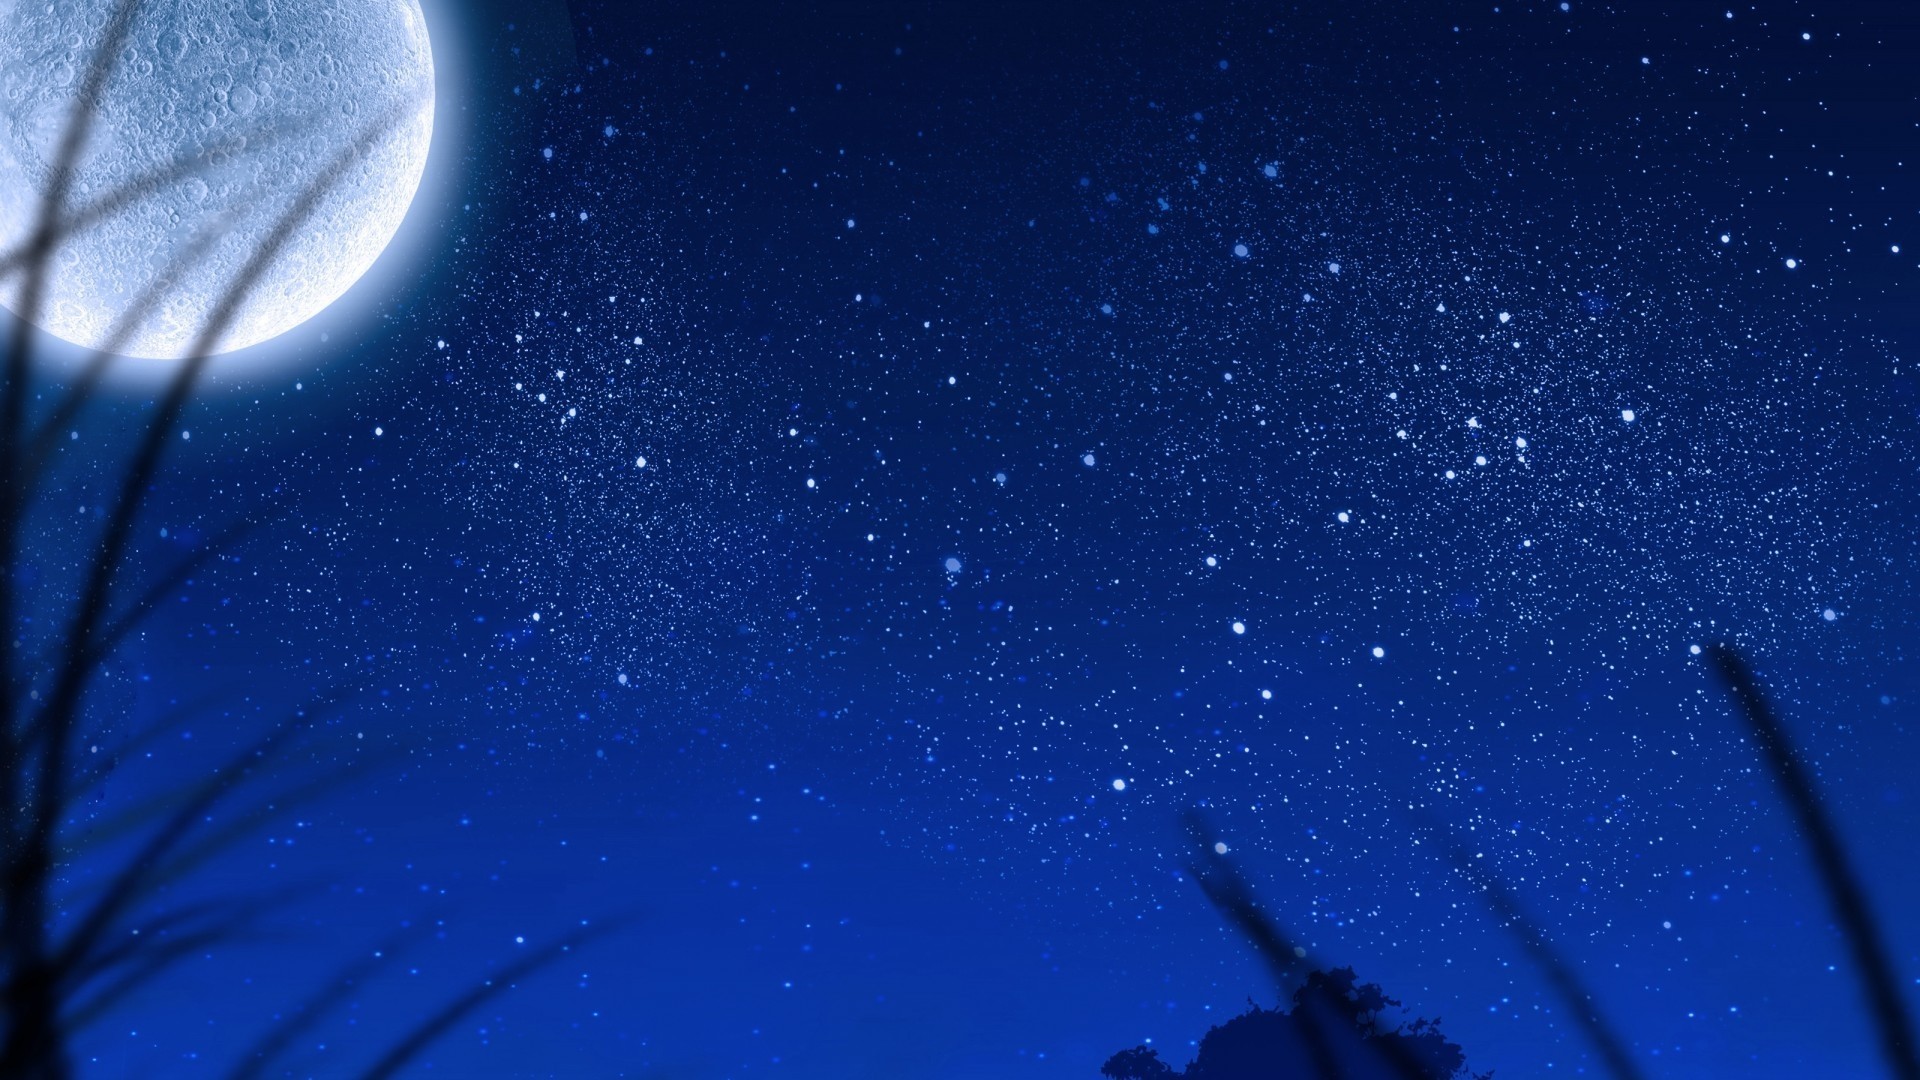 Starry Moon Night 2020 Wallpapers